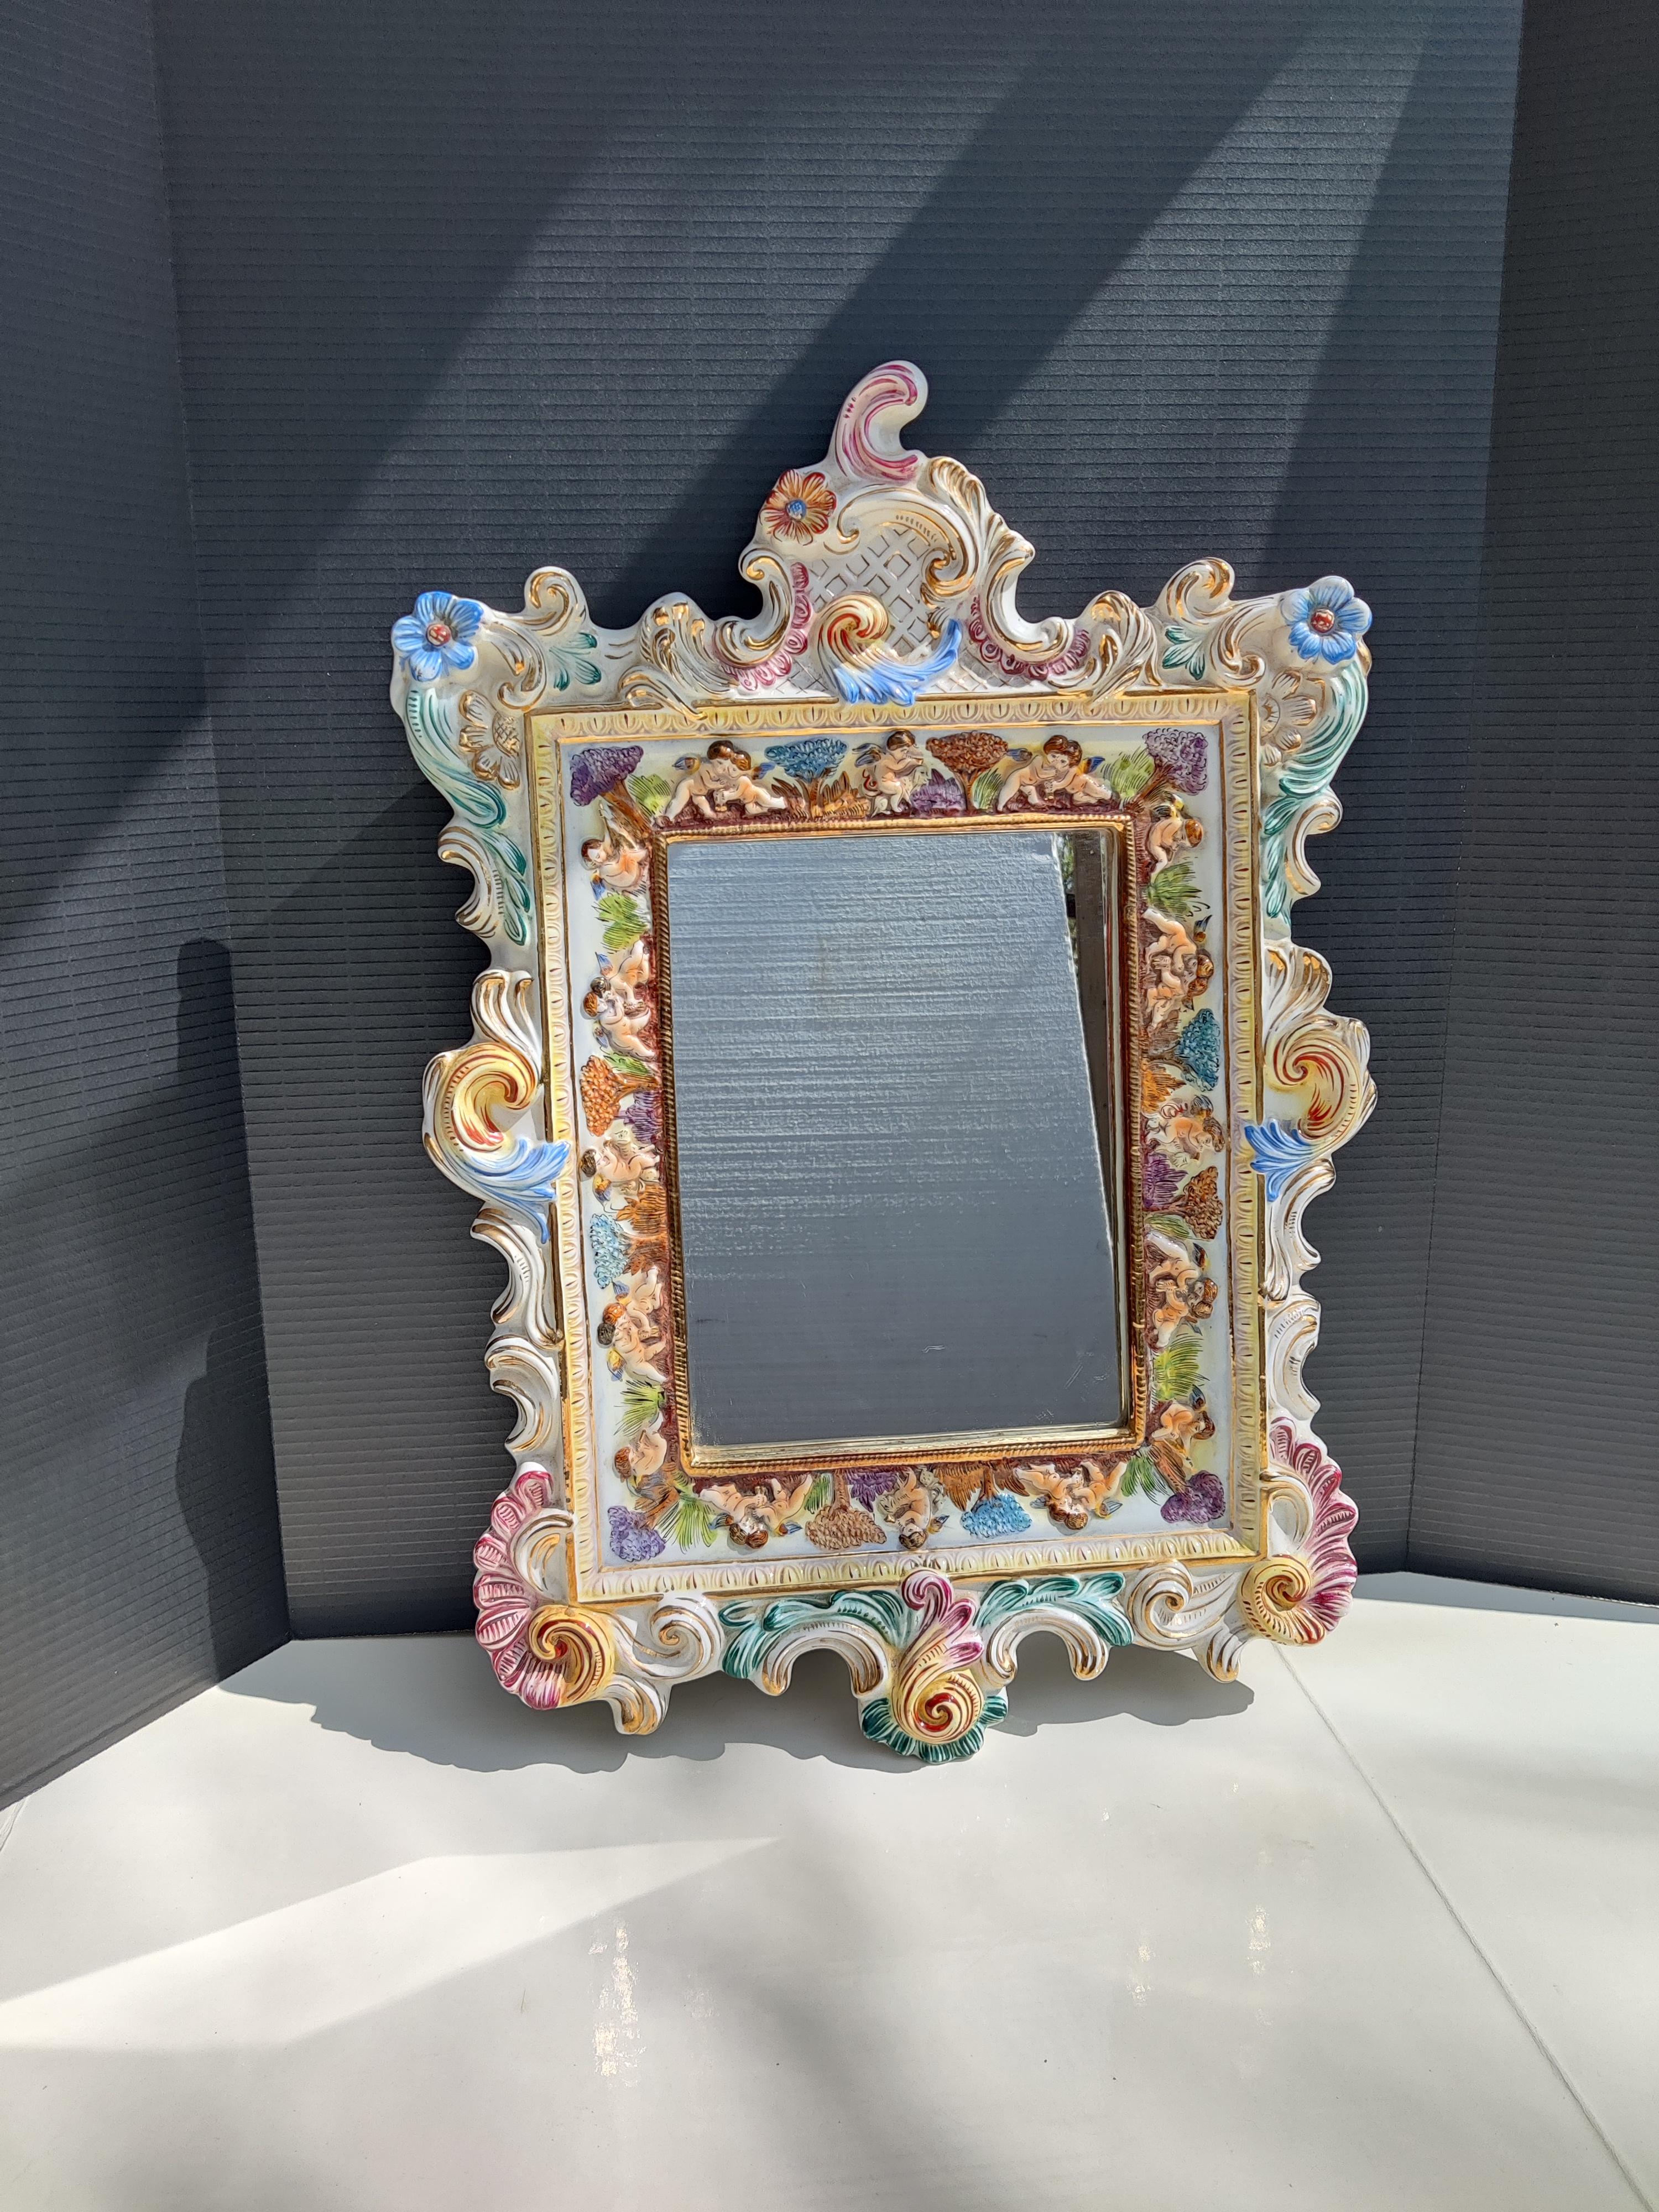 Capodimonte Mirror Italian
Rococo frame decorated with cherubs.
Excellent condition, not chips or damage.
Signed on back R. Capodimonte and R. San Marino. 
Mirror 11.5 x 8.38.